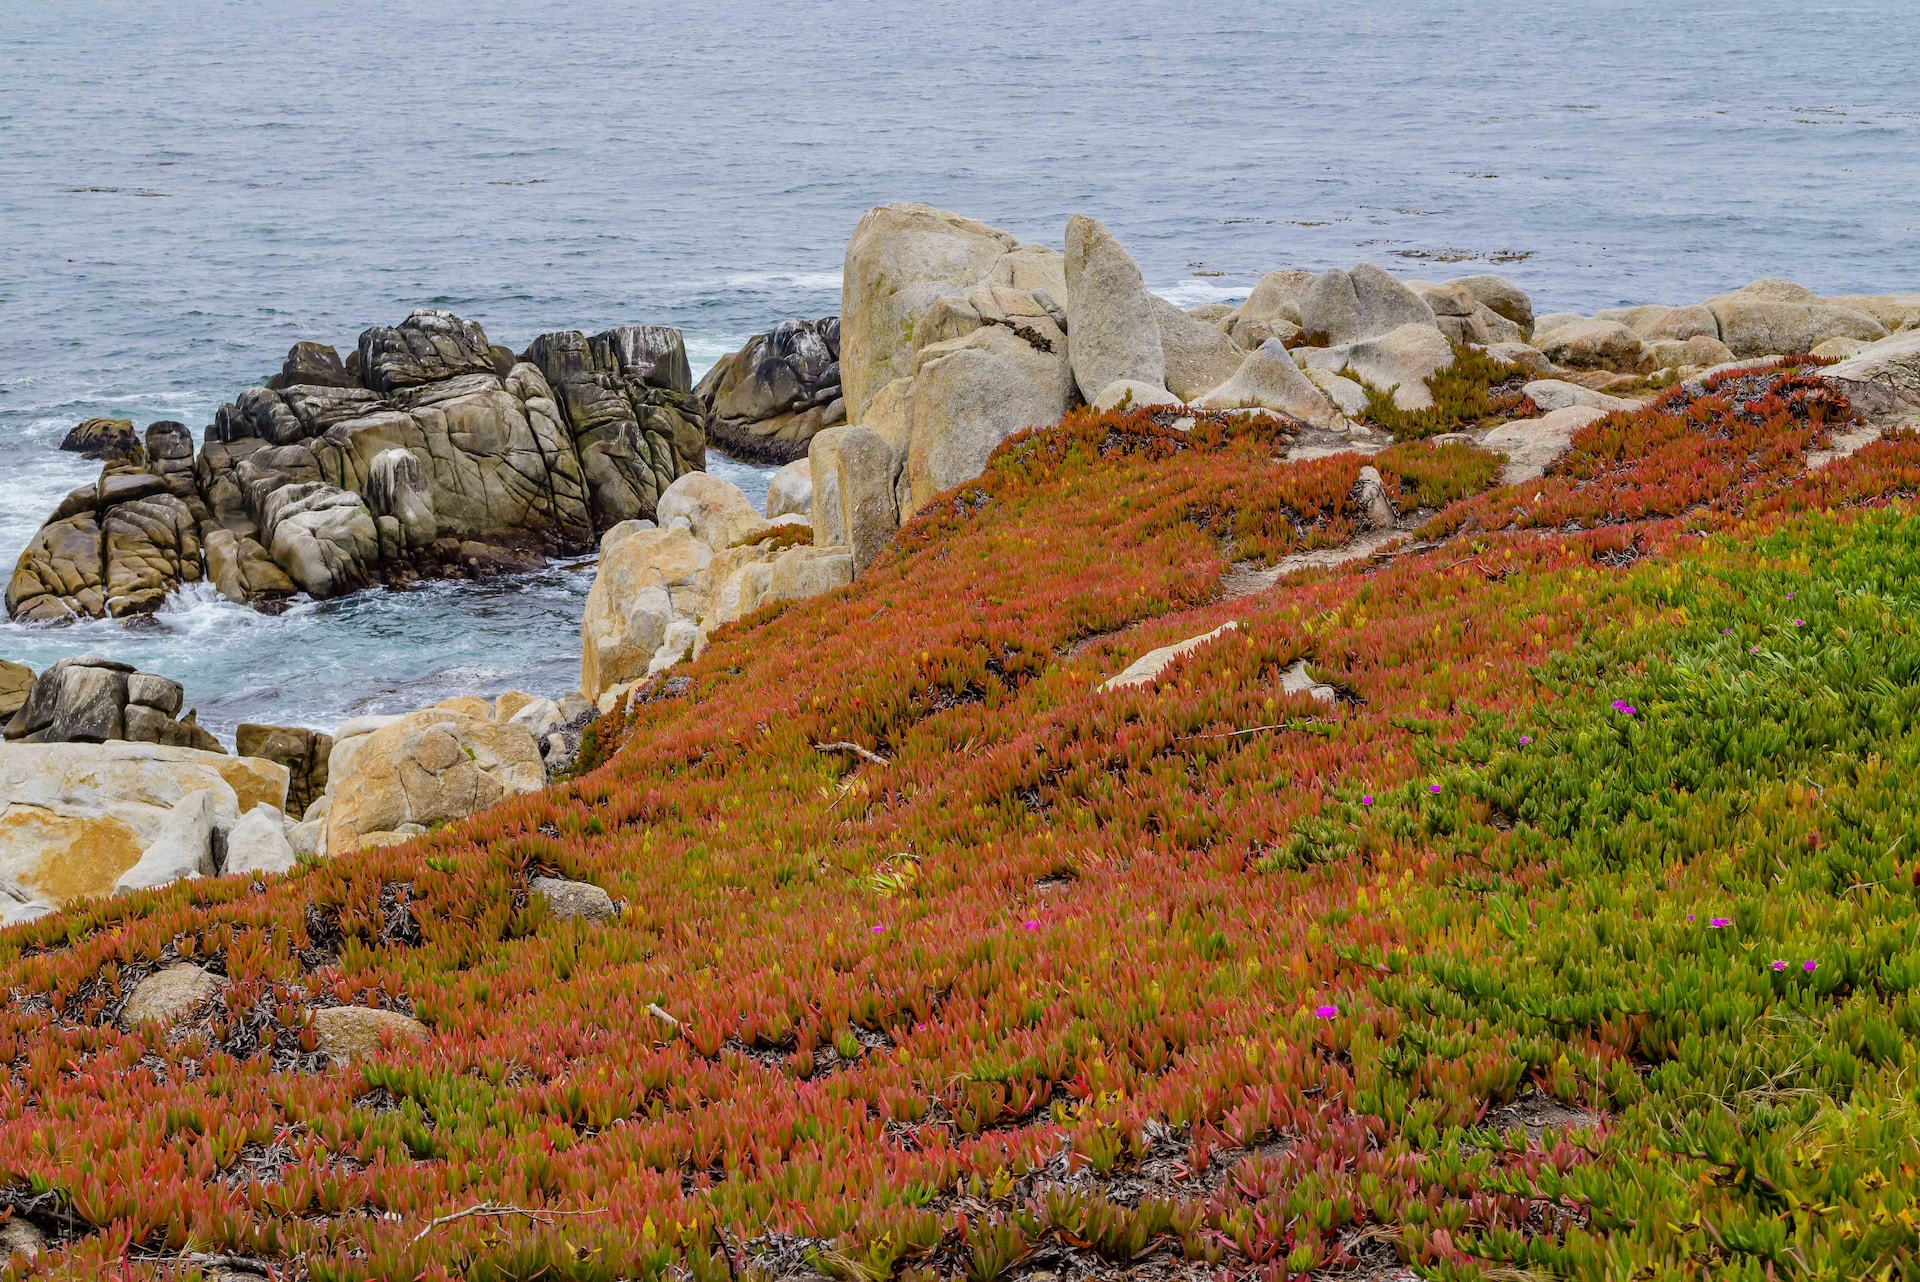 17-Mile Drive, rocks by the sea.